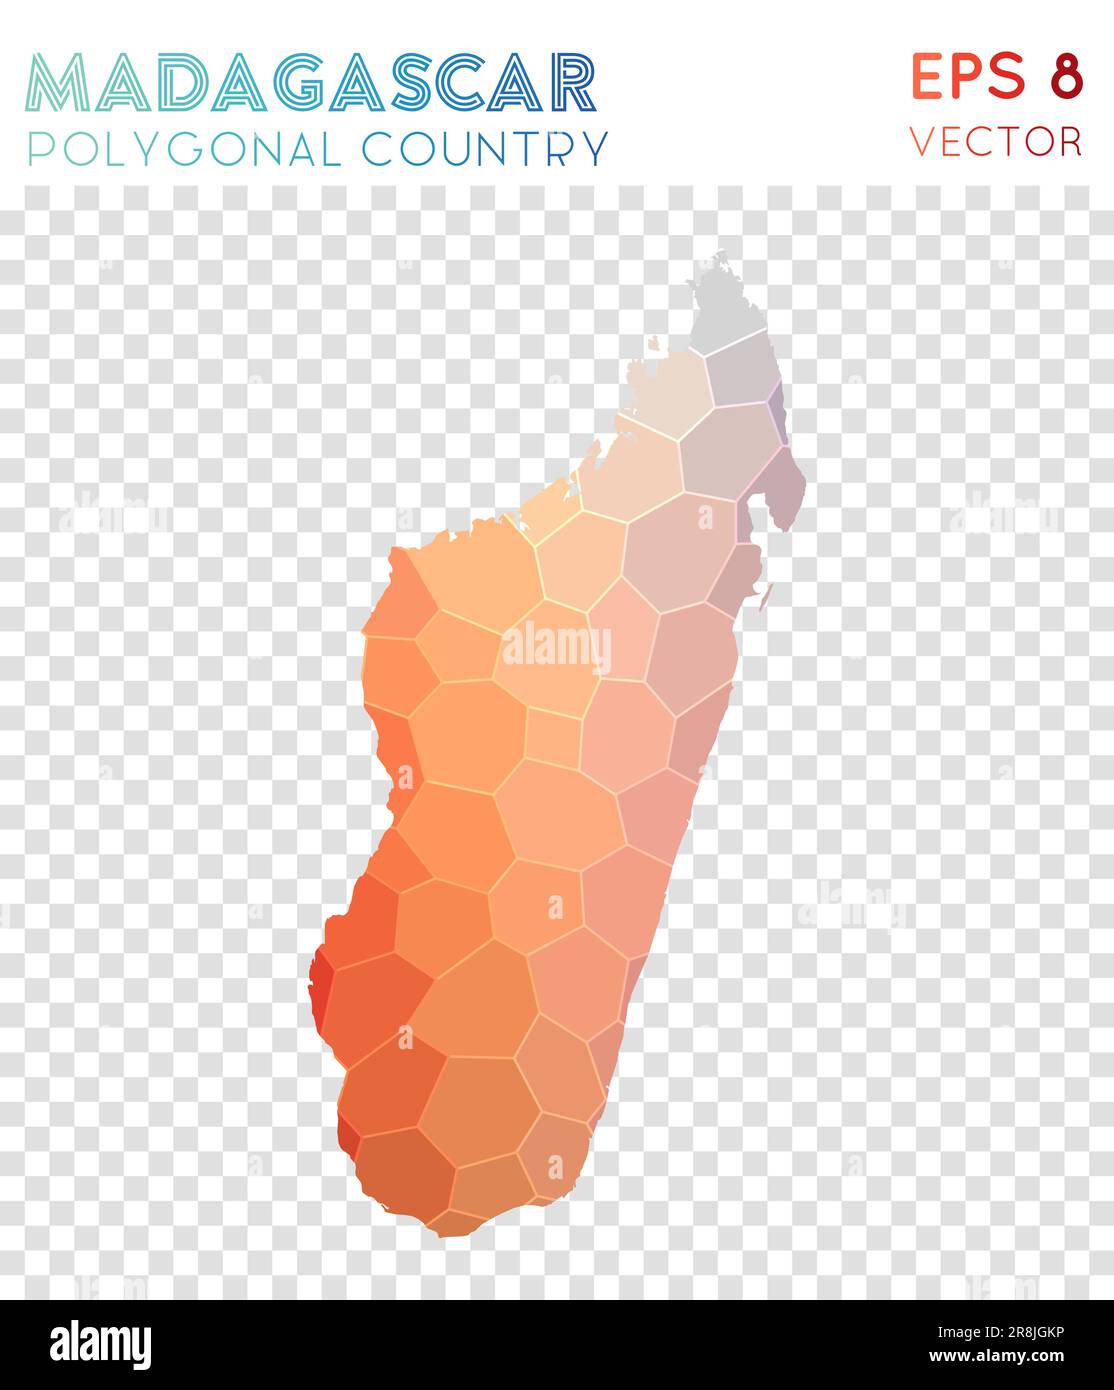 Madagascar polygonal map, mosaic style country. Remarkable low poly style, modern design. Madagascar polygonal map for infographics or presentation. Stock Vector